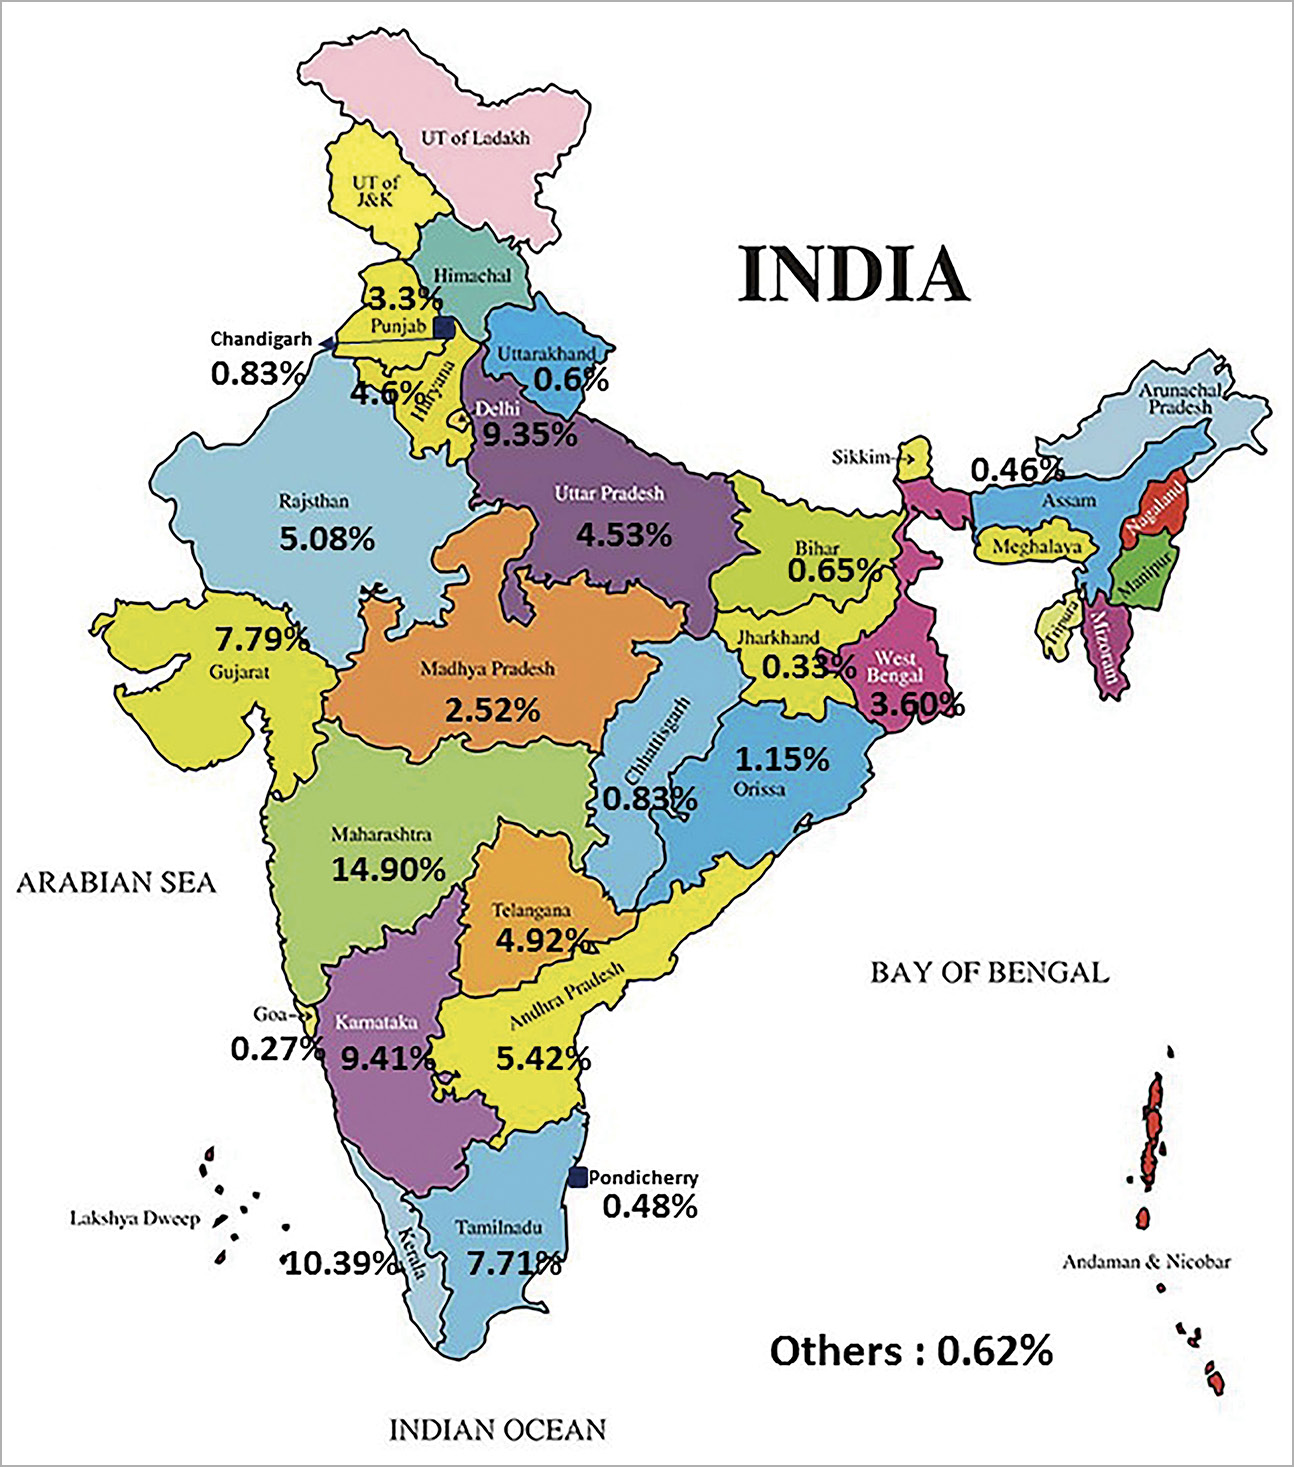 Figure 1. The state-wise contribution of interventional cardiac procedures in India. UT: union territory